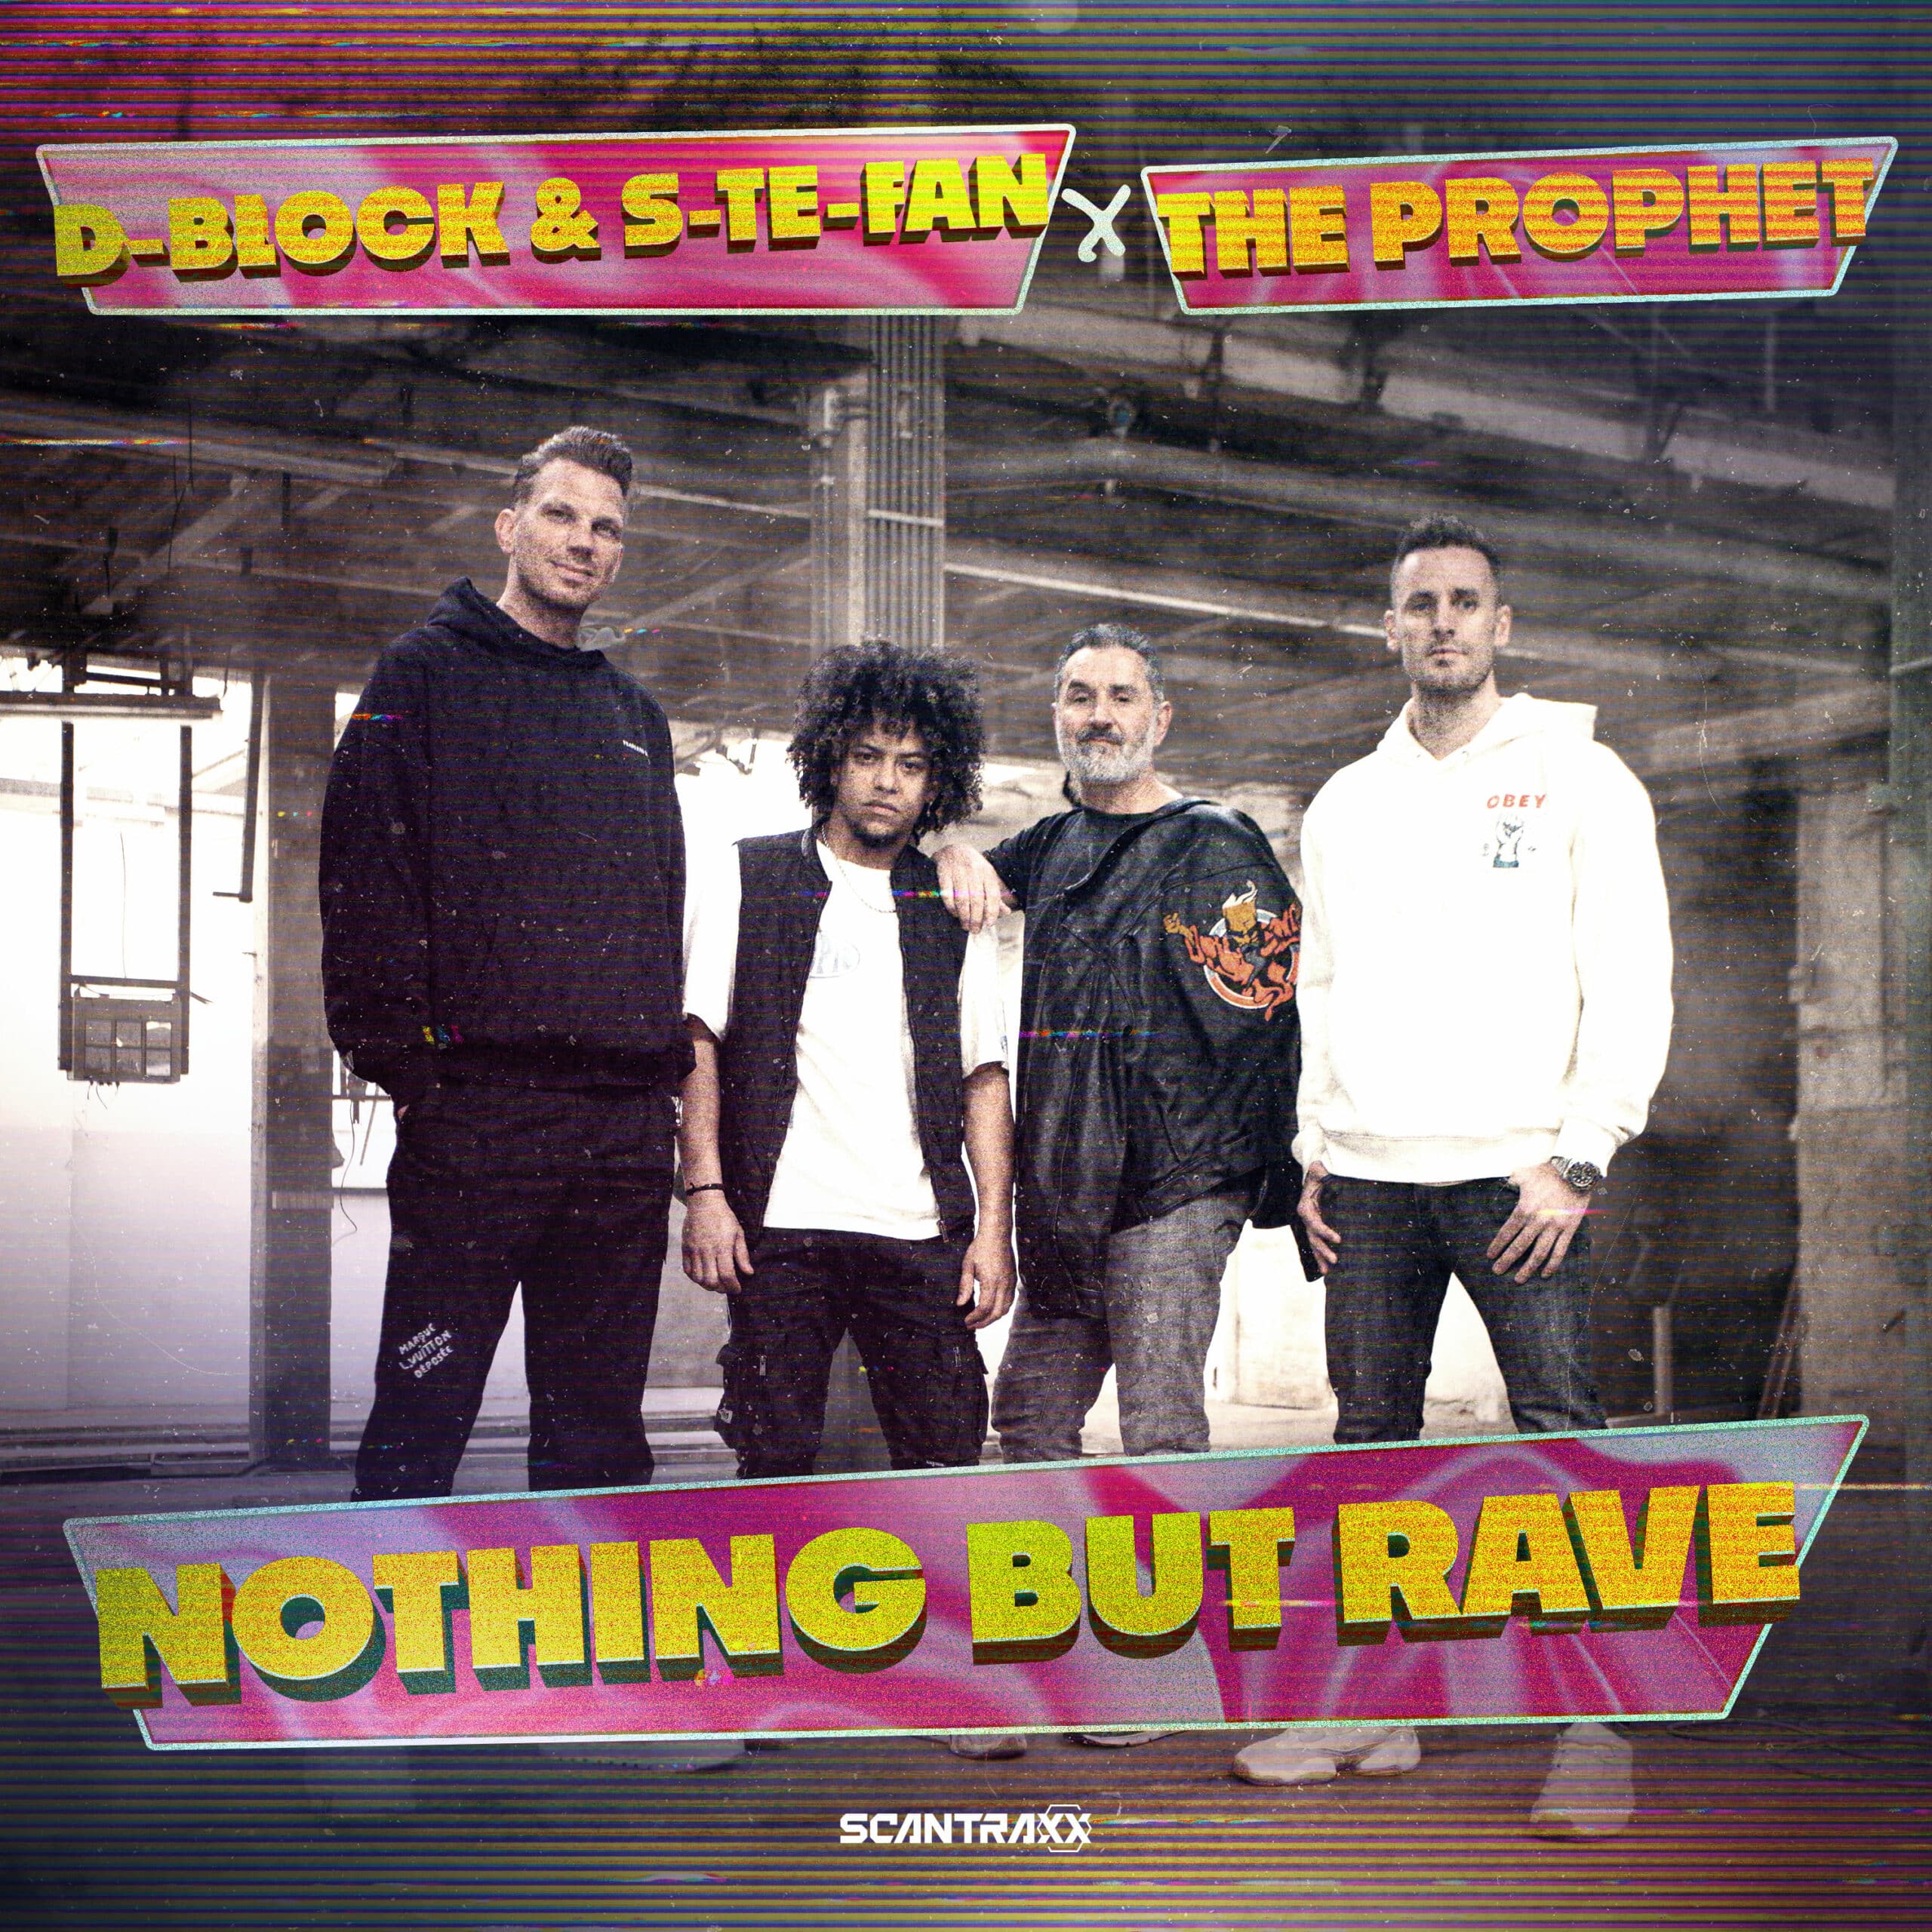 D-Block & S-te-Fan and The Prophet - Nothing But Rave artwork